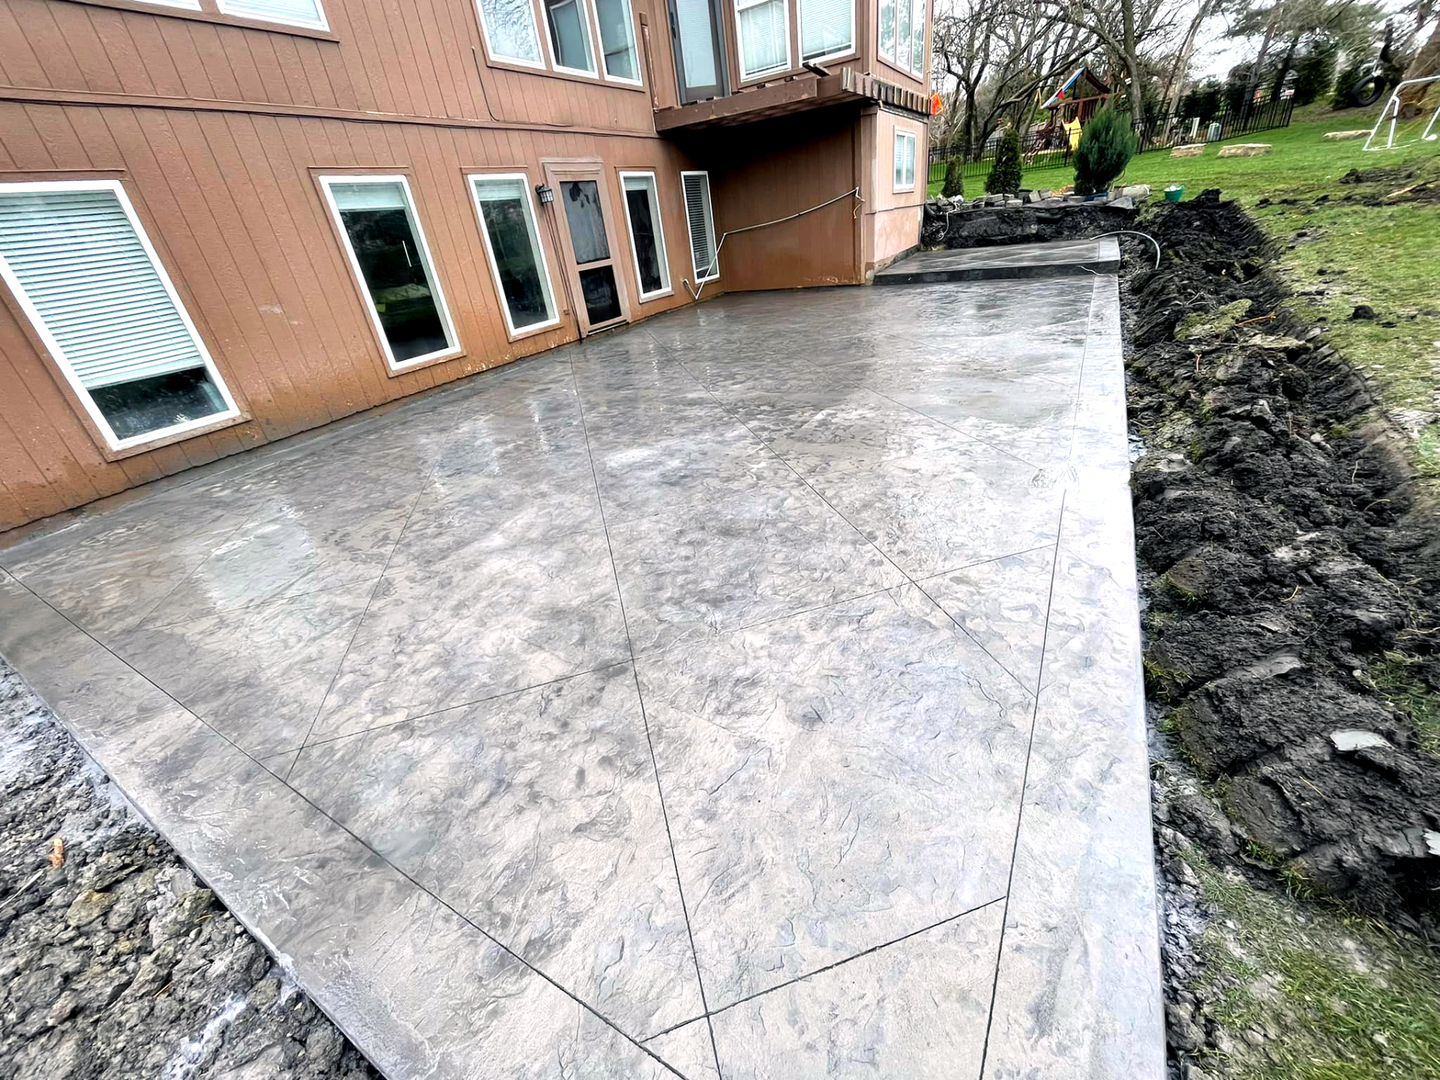 Brand new stamped and sealed patio